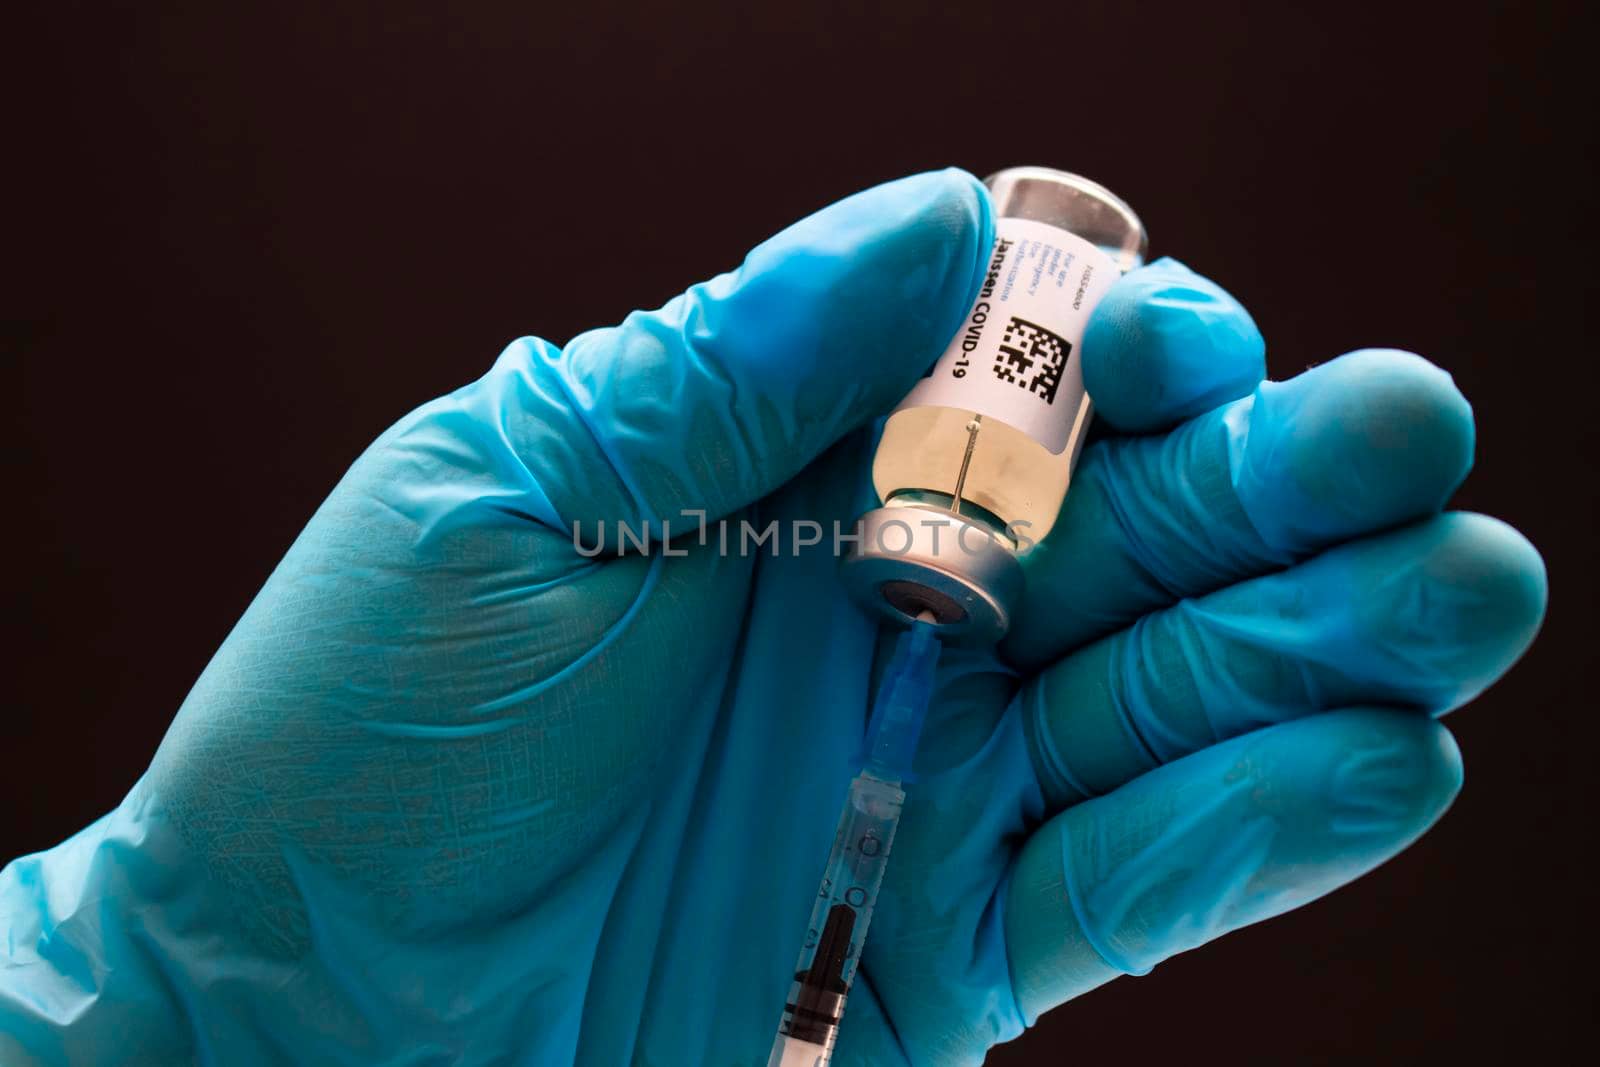 Calgary, Alberta. Canada. April 02, 2021. Health care worker with a Janssen or Johnson and johnson Vaccine and injection syringe. by oasisamuel